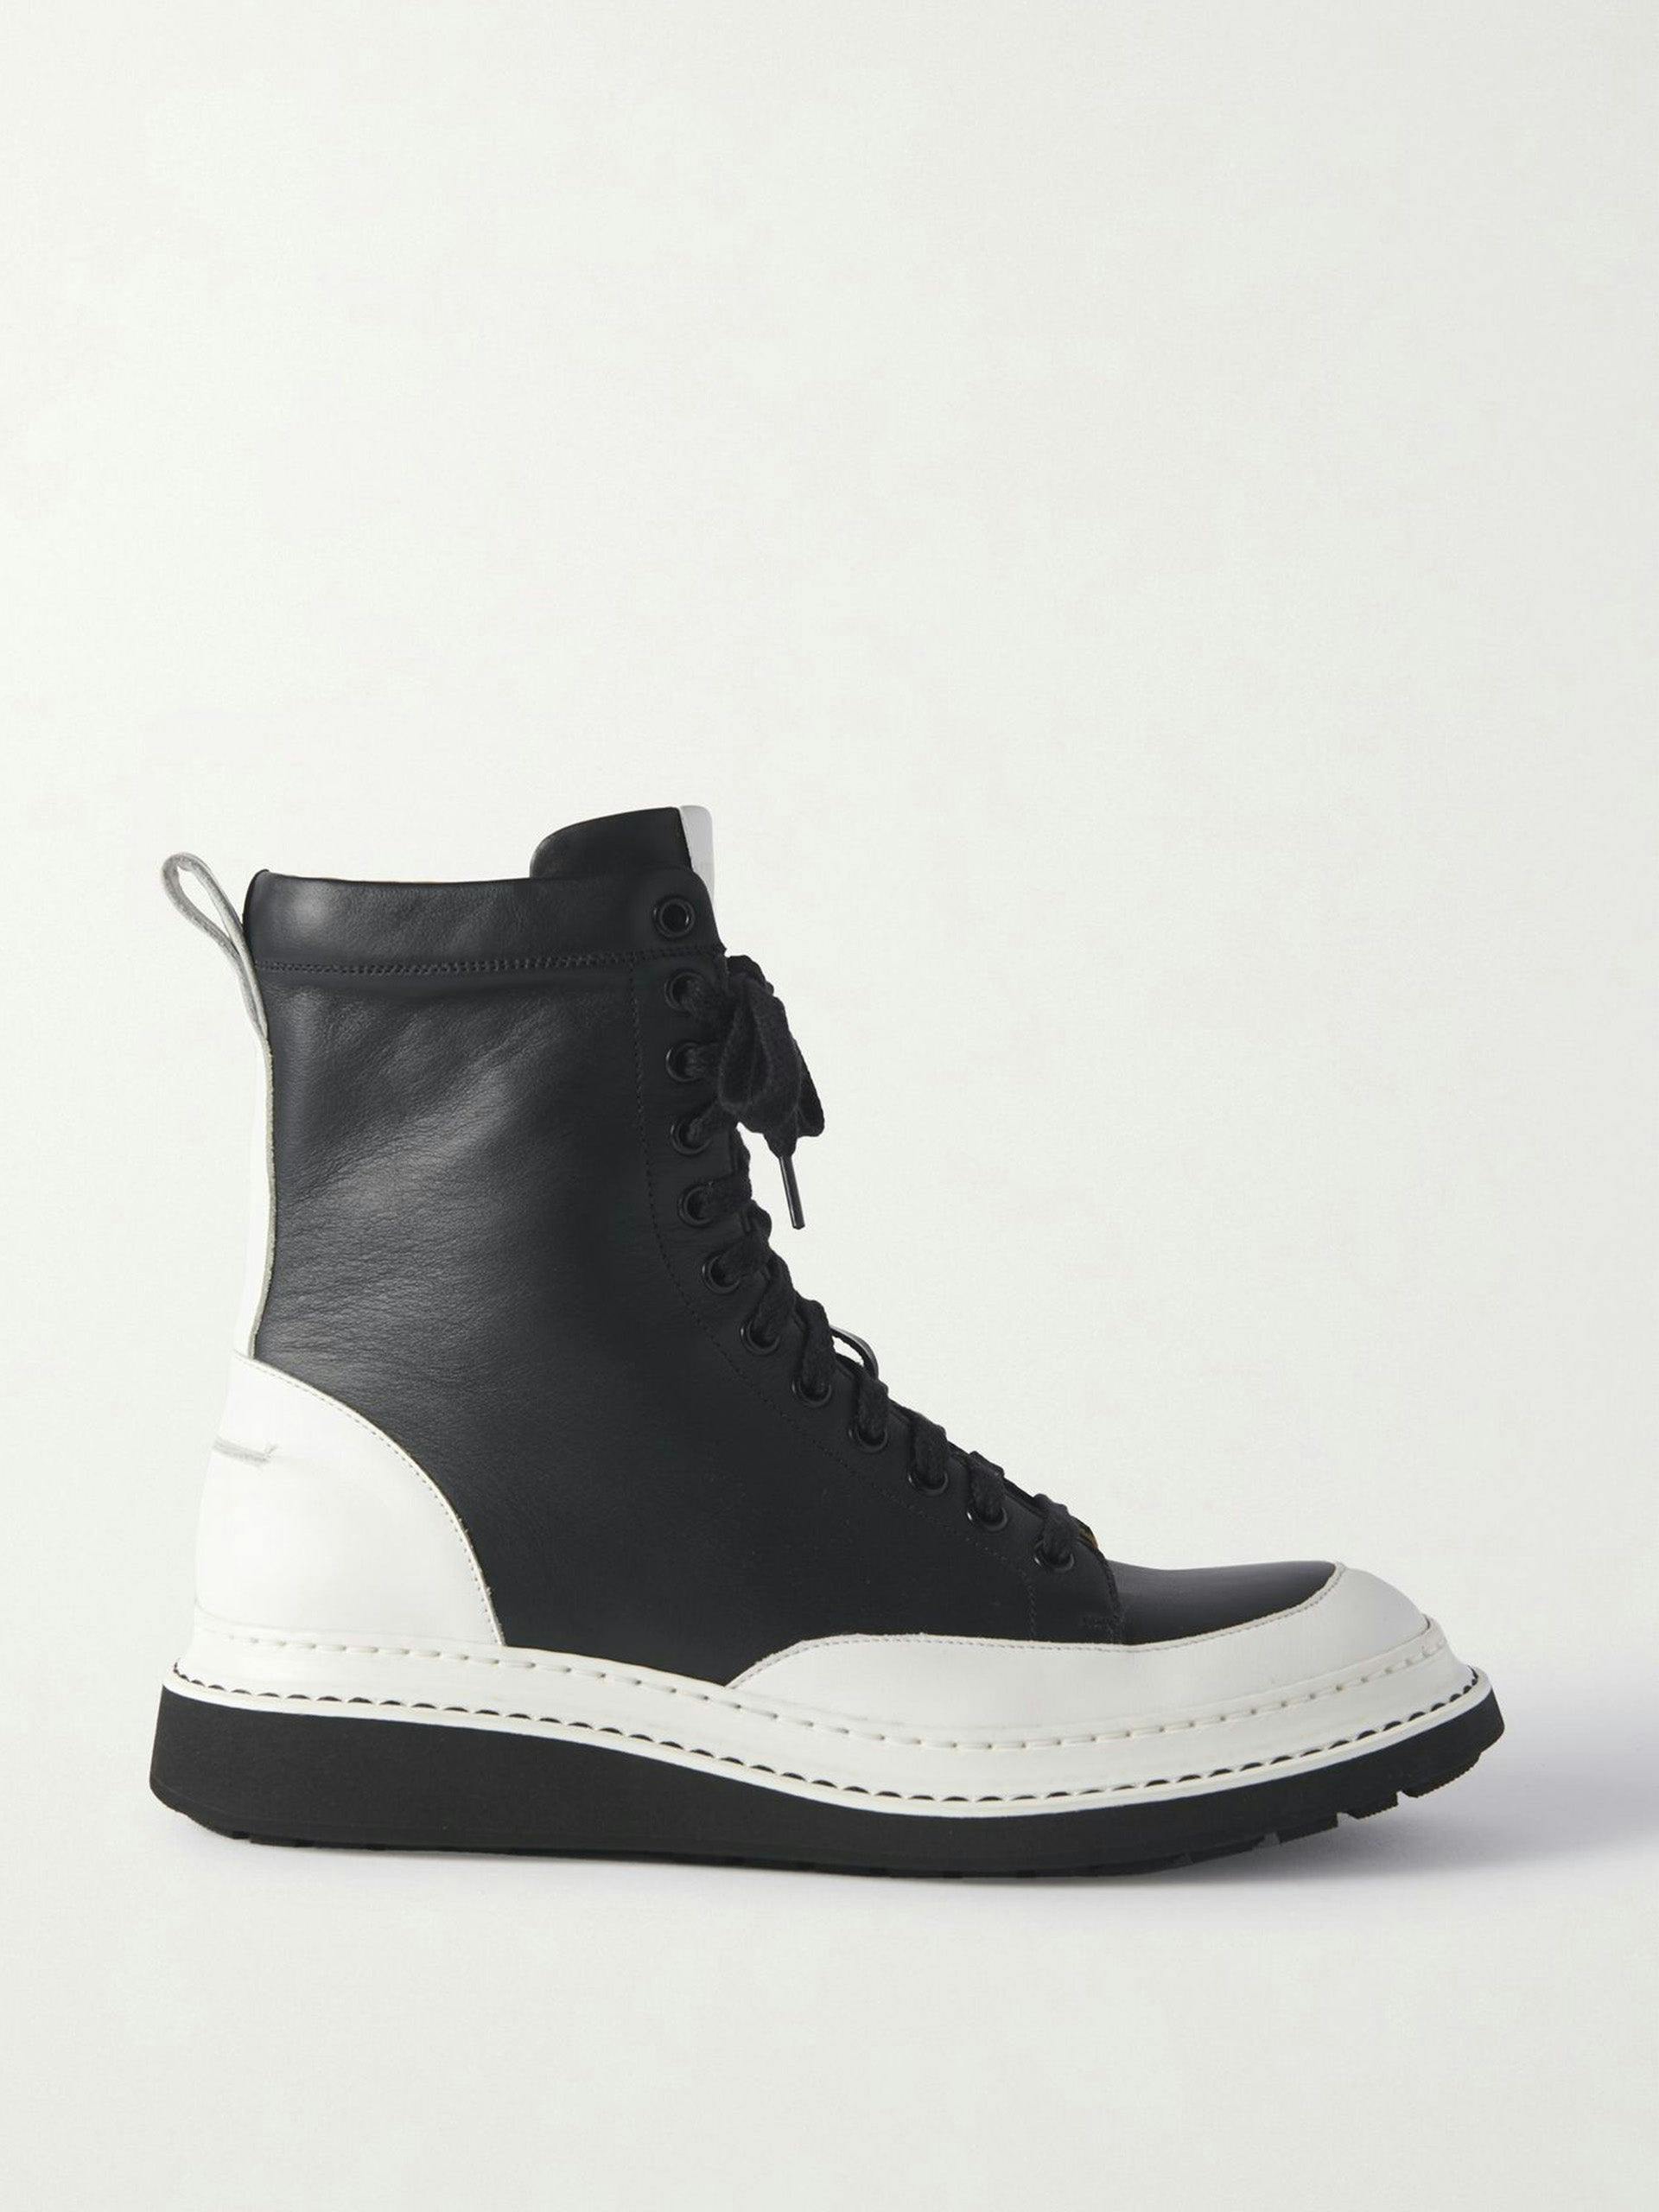 Two-tone leather combat boots